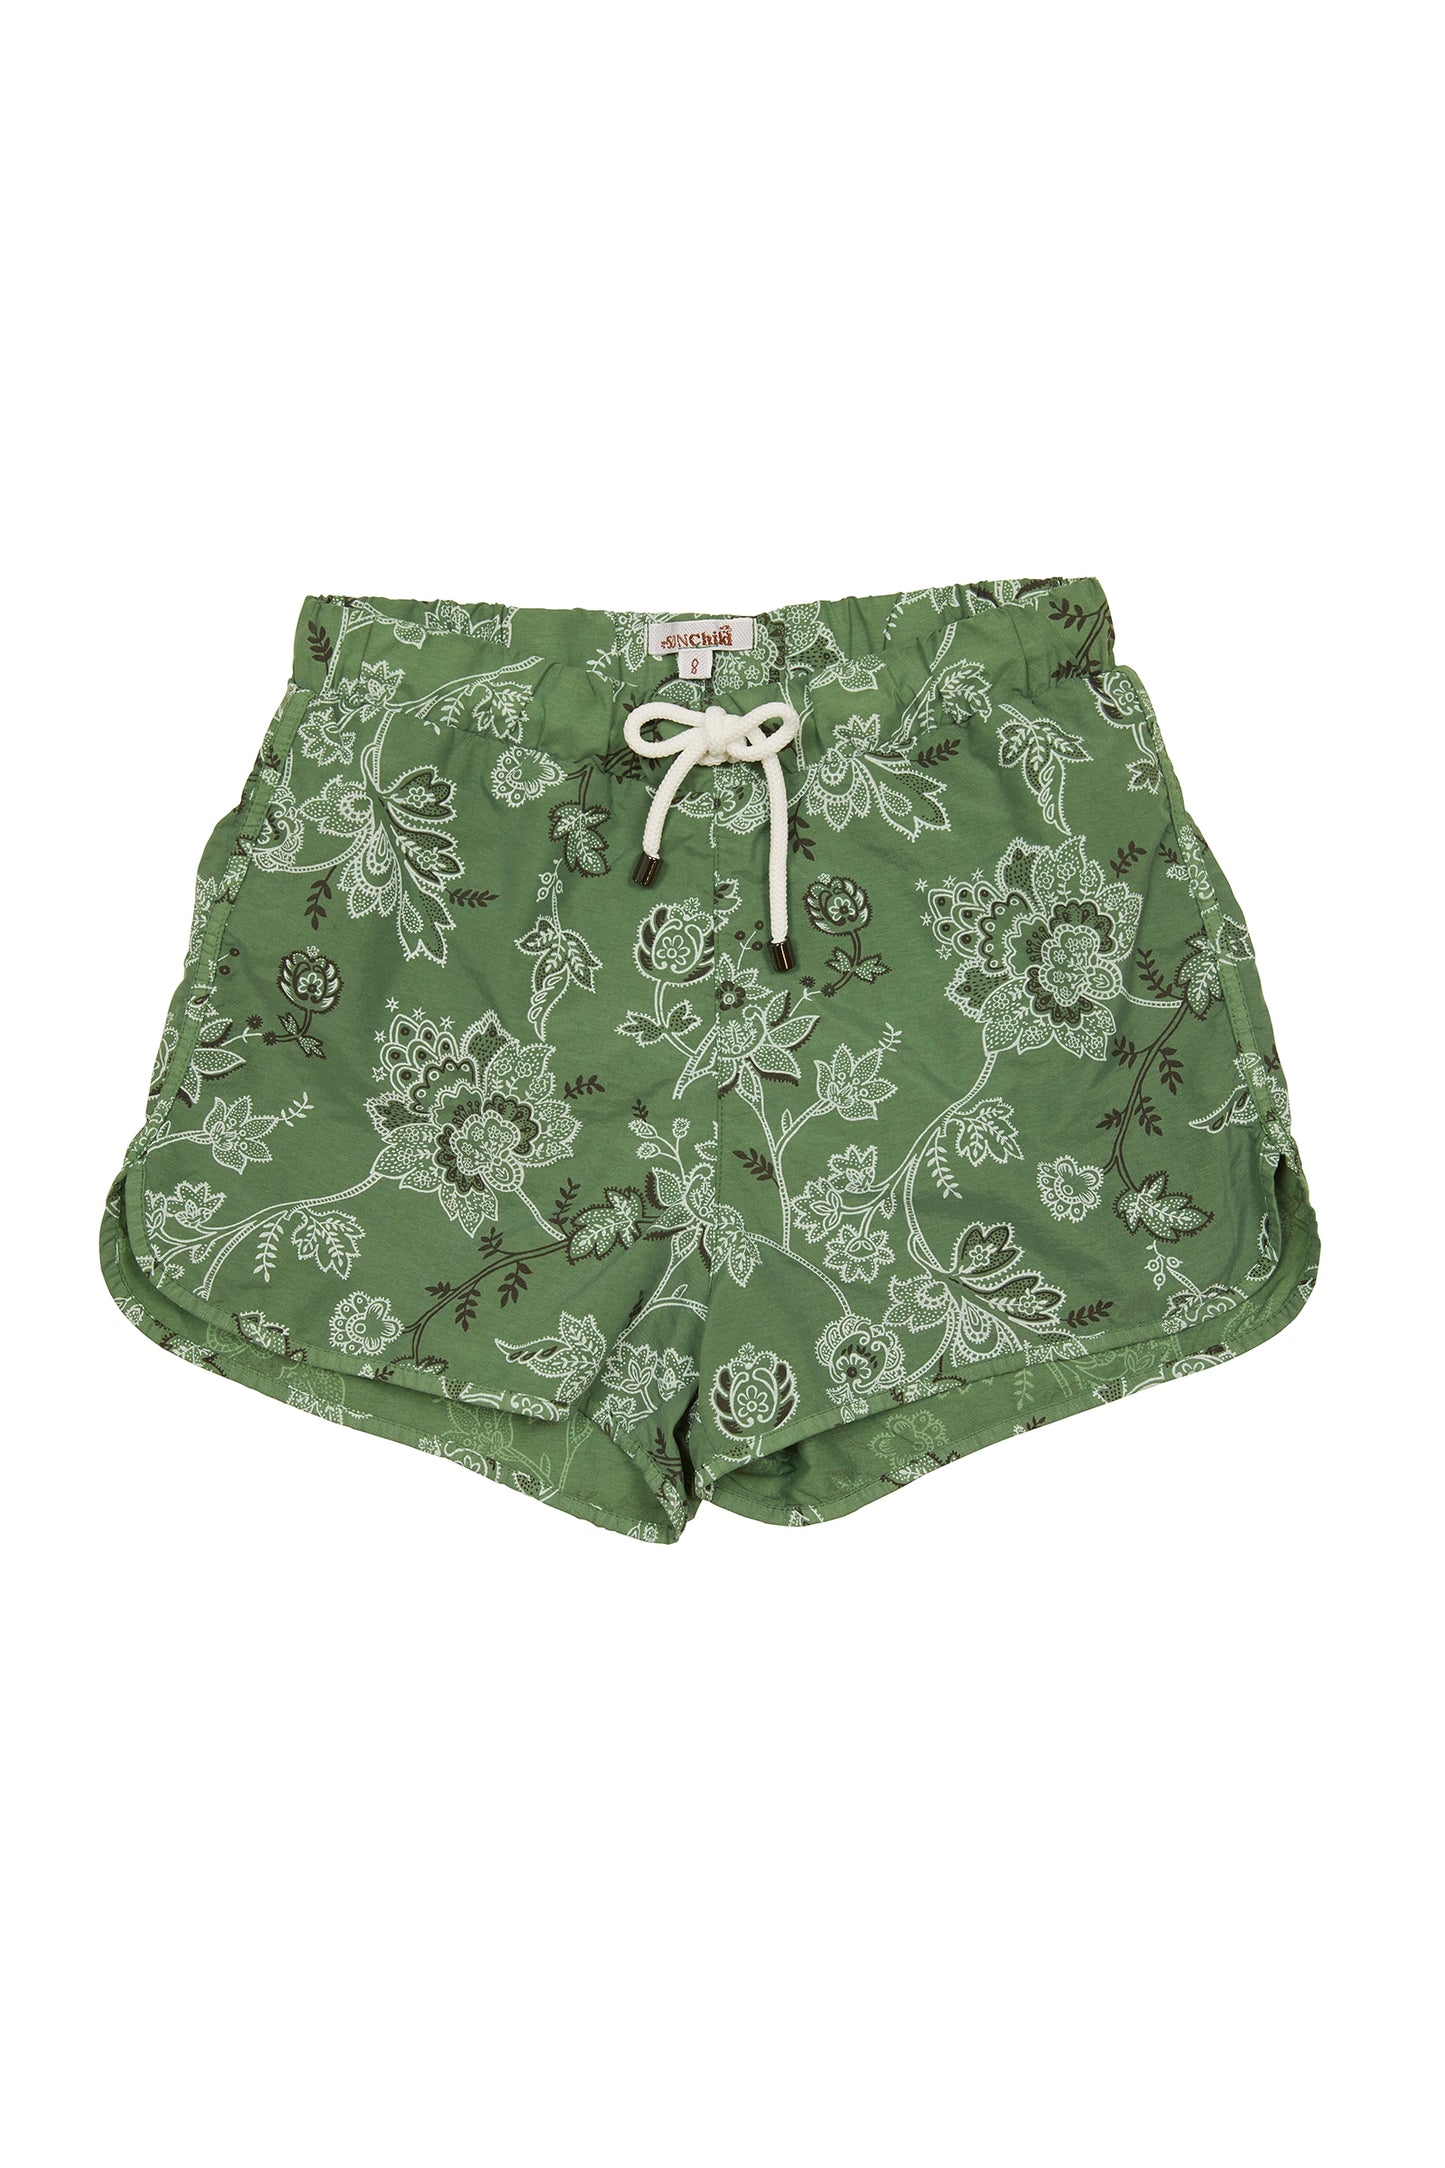 Boys swim trunks in green with paisley white design